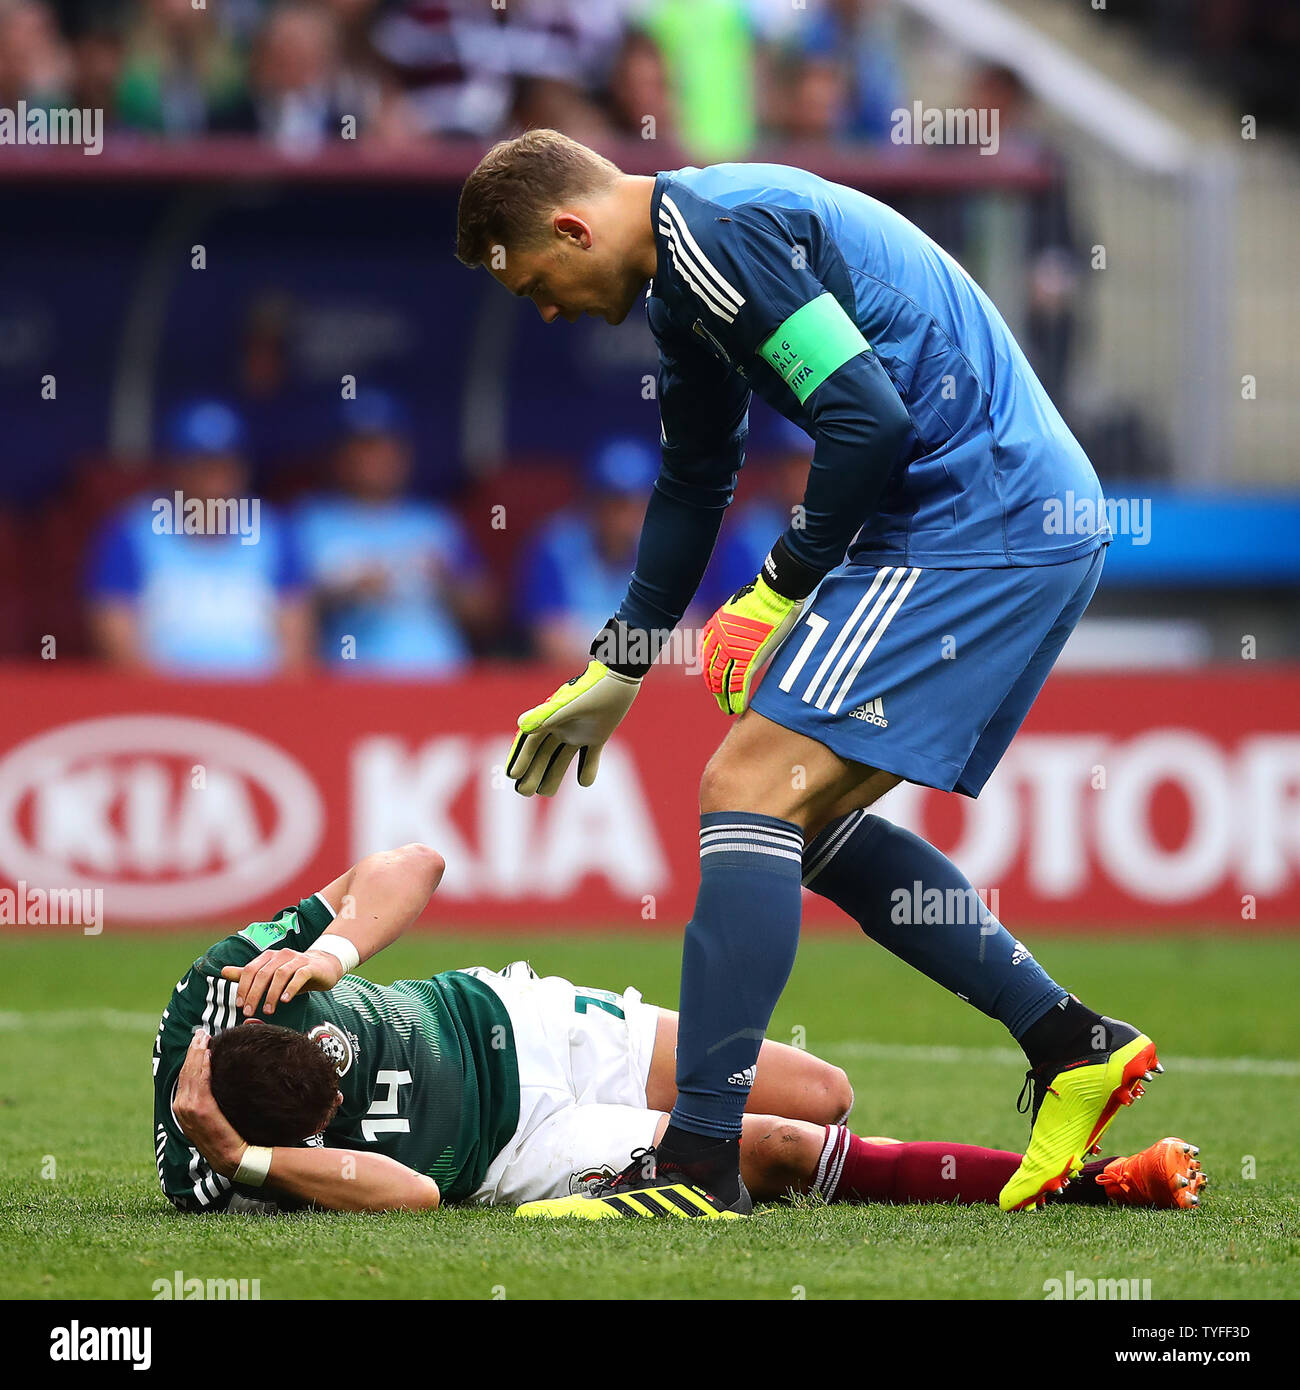 Manuel Neuer of Germany stands over Javier Hernandez of Mexico as he lies injured during the 2018 FIFA World Cup Group F match at the Luzhniki Stadium in Moscow, Russia on June 17, 2018. Photo by Chris Brunskill/UPI Stock Photo